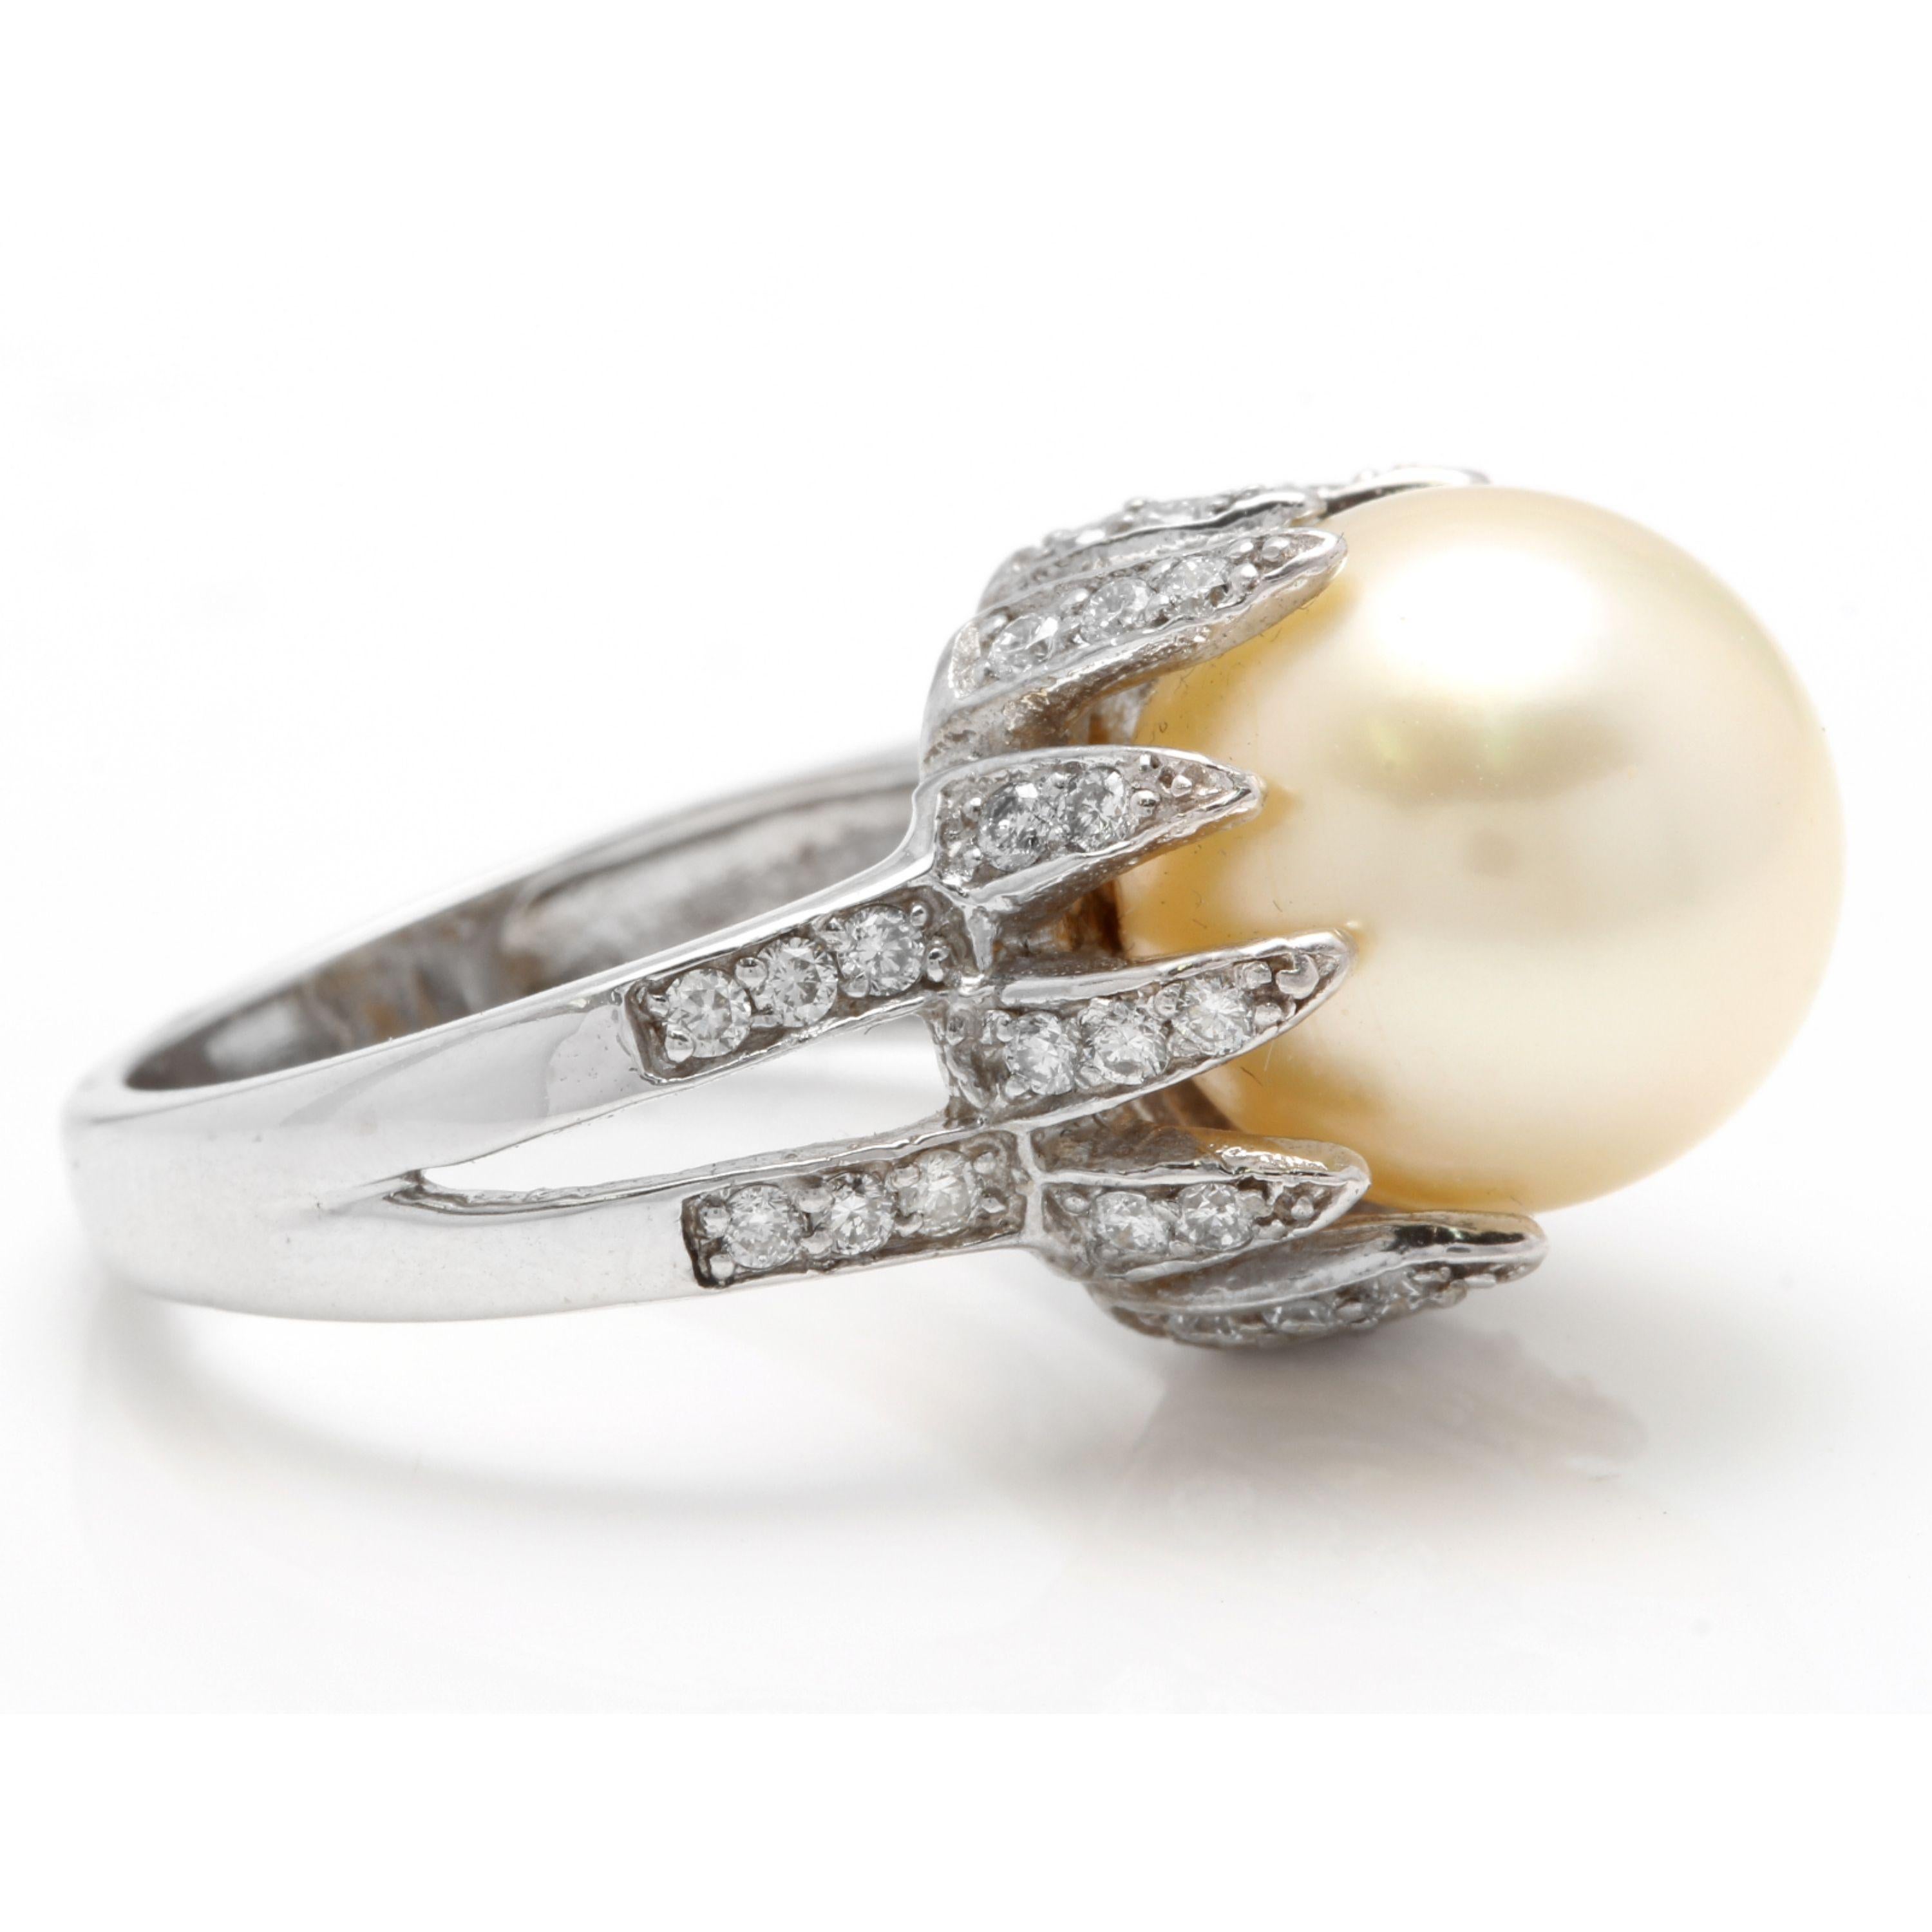 Splendid Natural South Sea Pearl and Diamond 14K Solid White Gold Ring

Stamped: 14K

Total Natural Pearl Measures: Approx. 12.50mm

Total Natural Round Diamonds Weight: Approx. 0.80 Carats (color G-H / Clarity SI1-Si2)

Ring size: 7 (we offer free